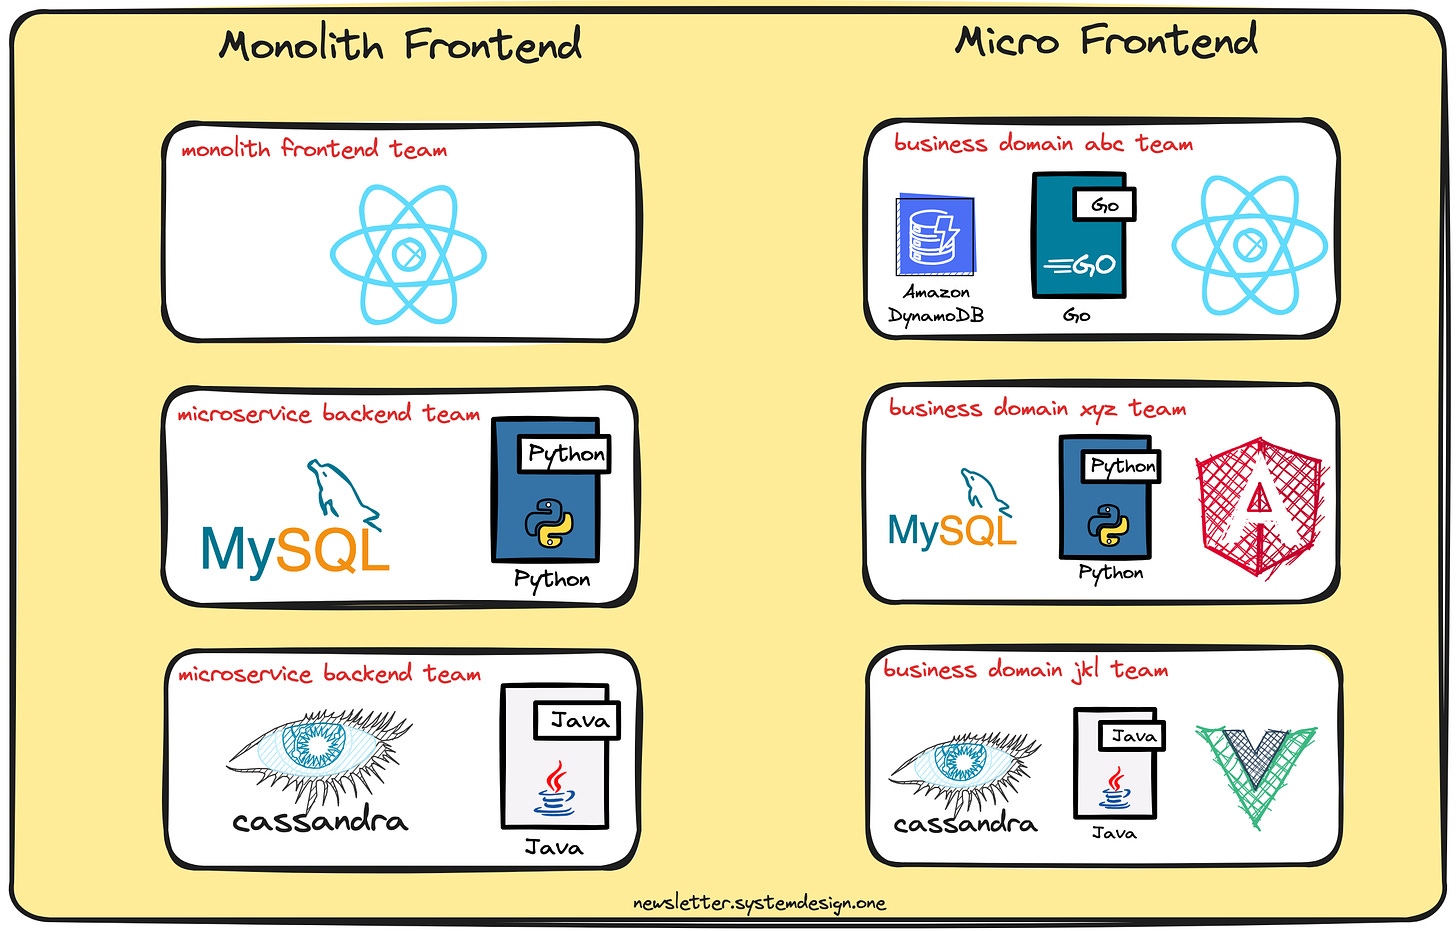 Micro Frontends vs Monolith Frontends